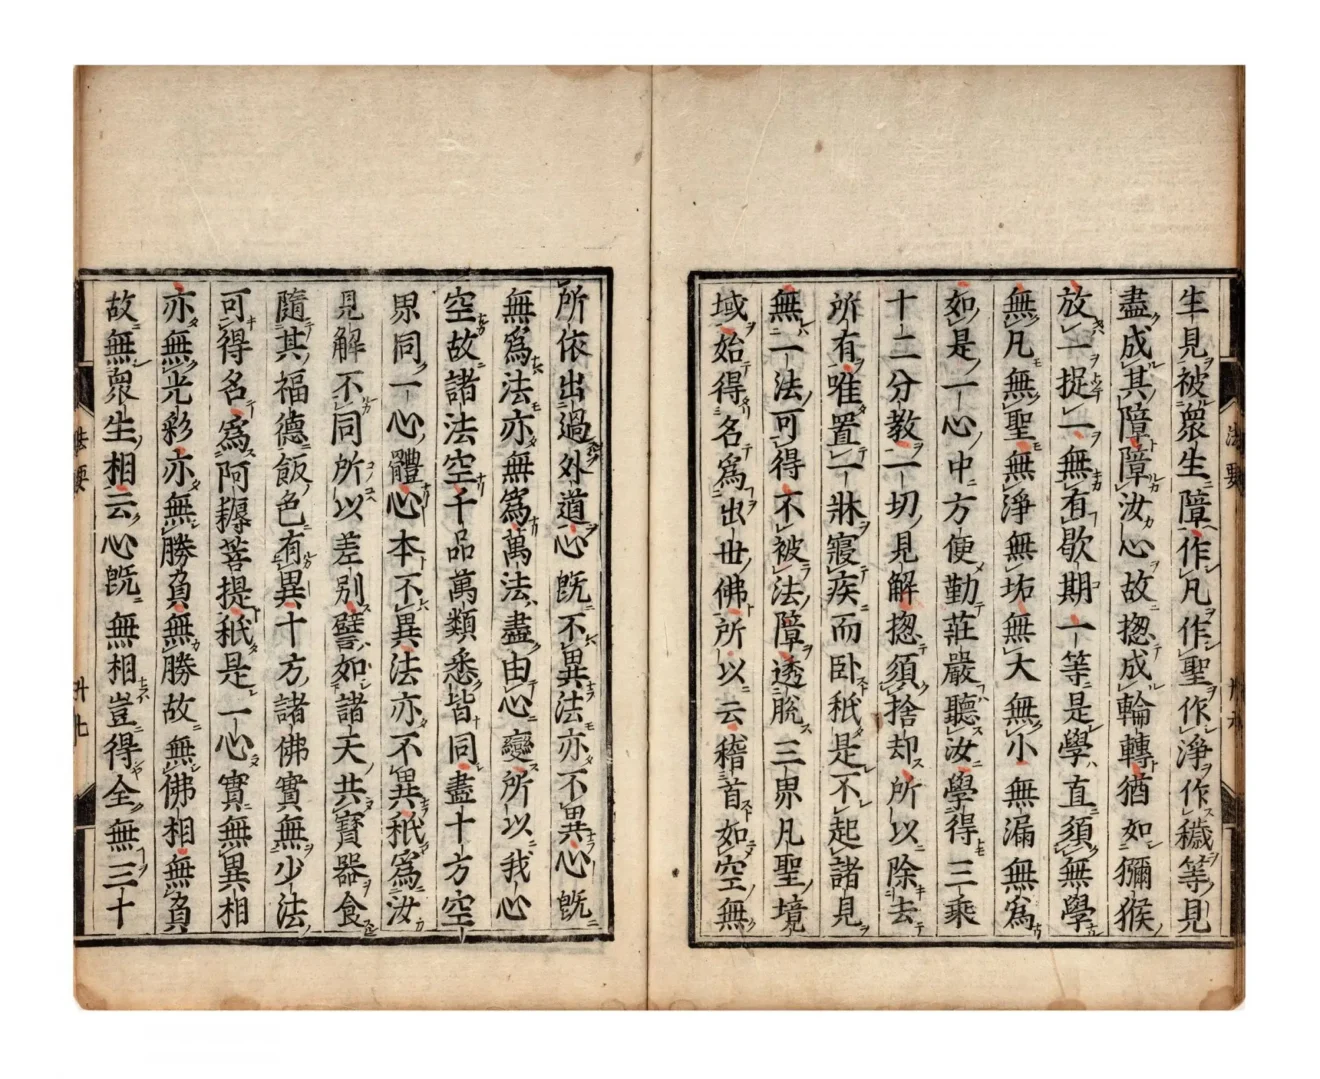 Huangbo's Transmission of Mind - Parts 10 to 18